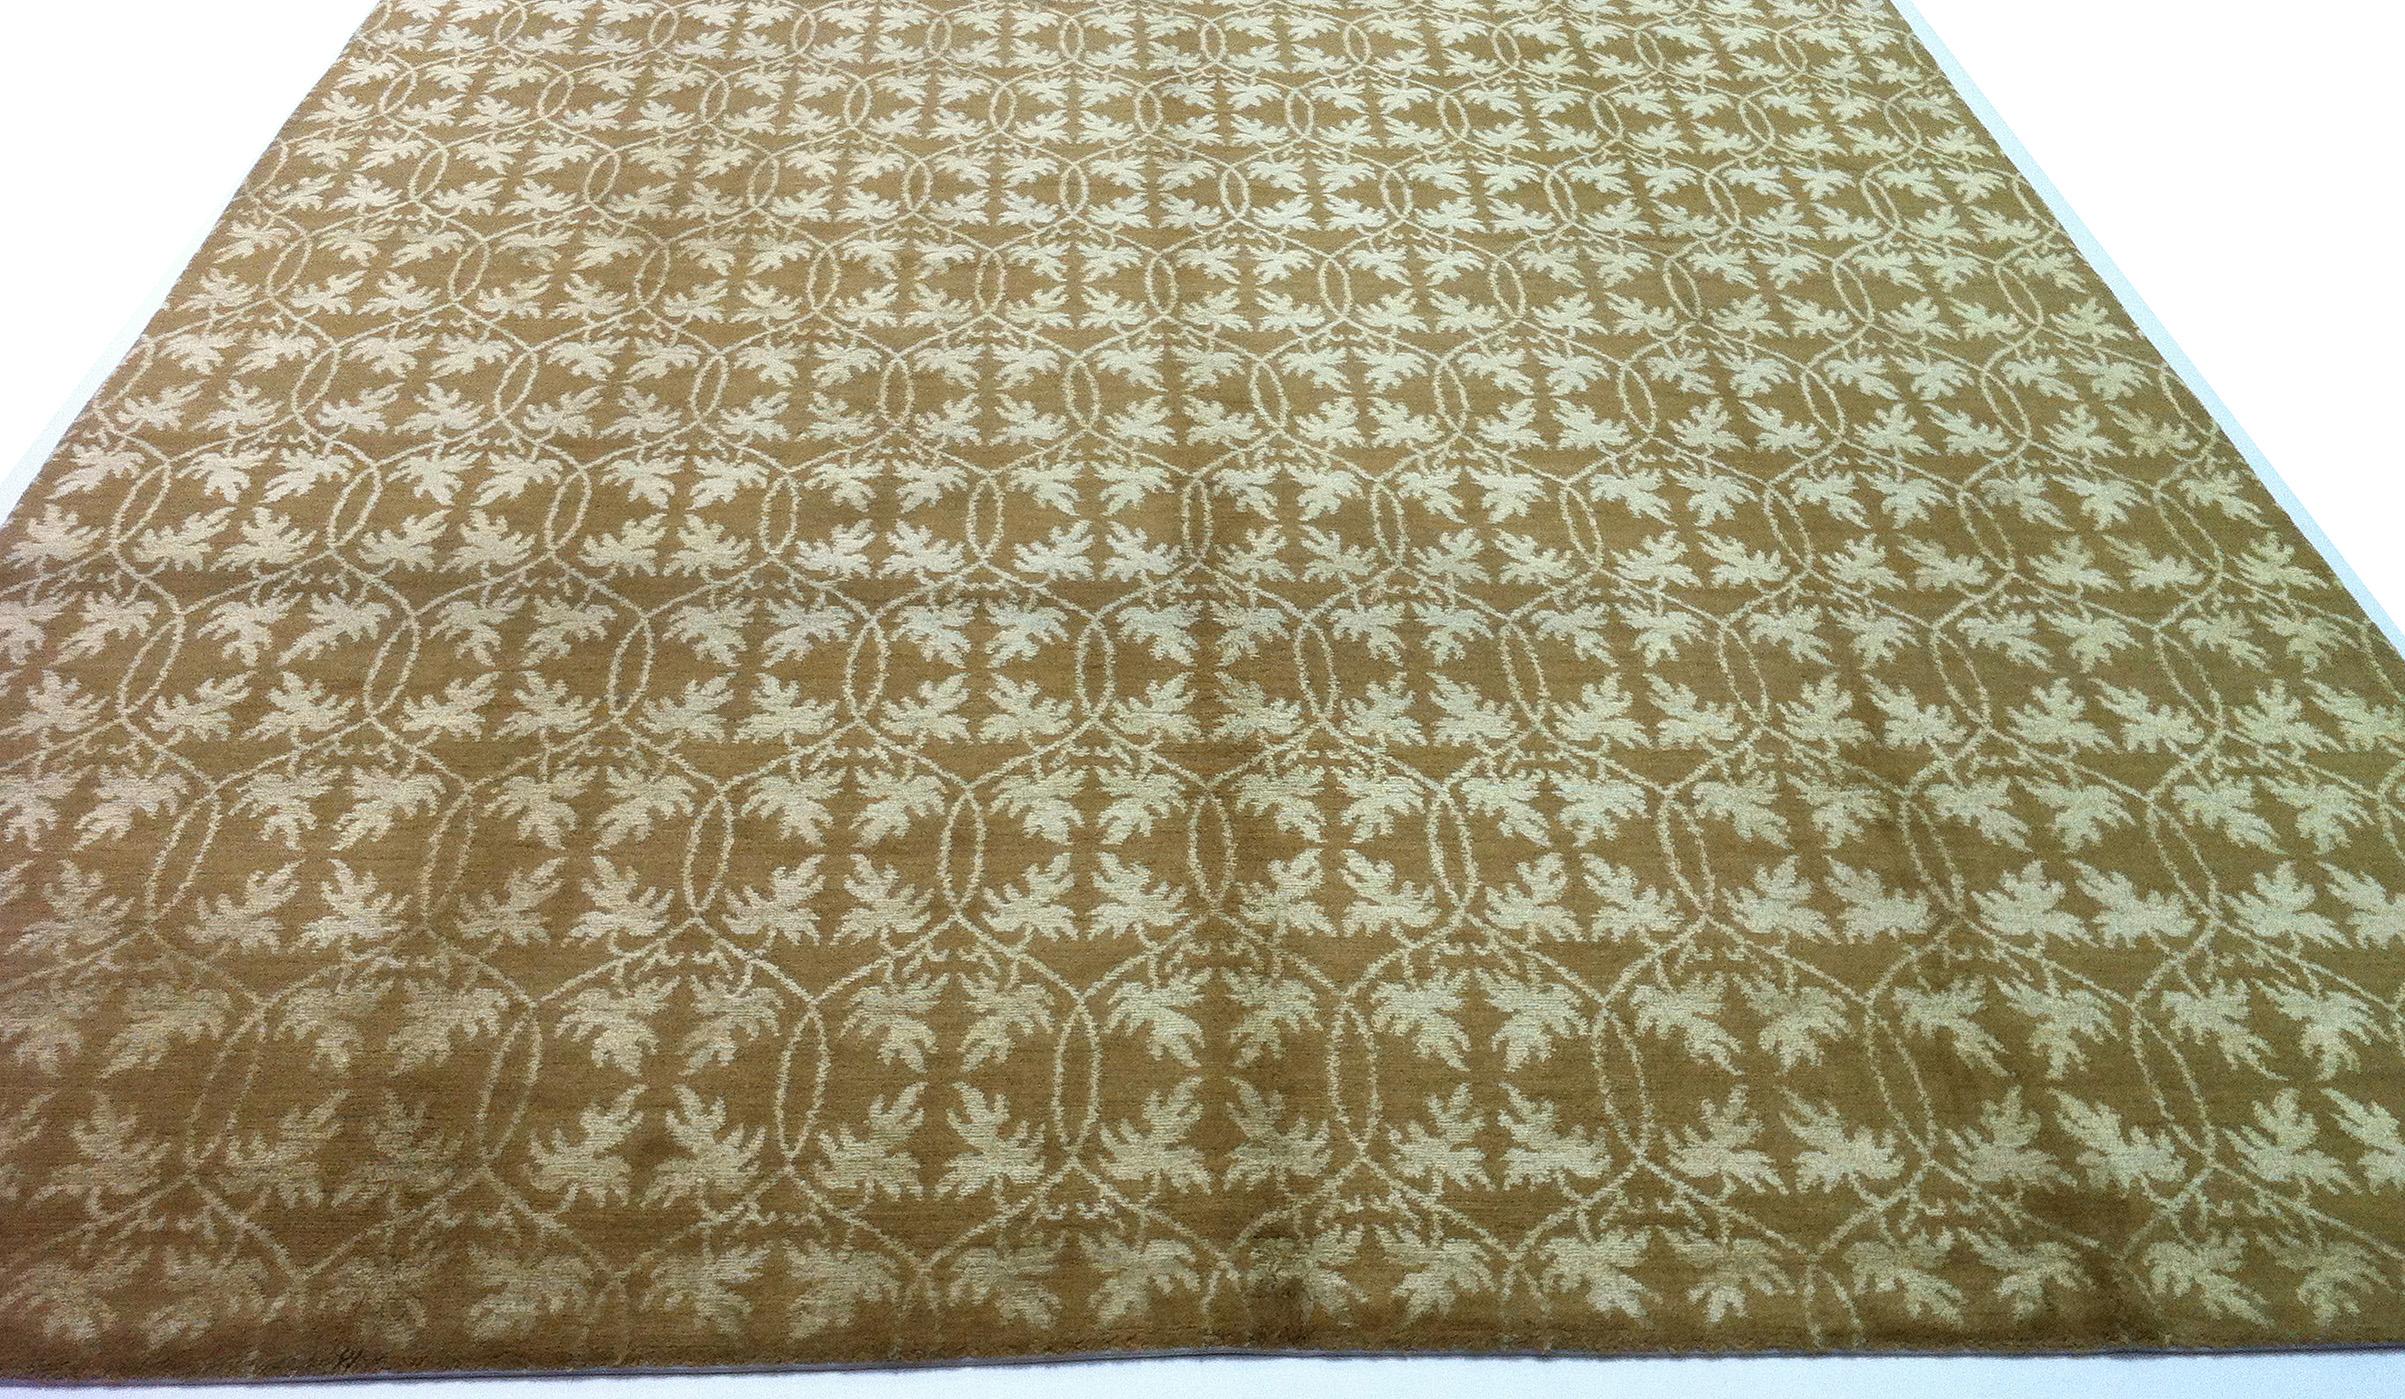 Create an elegant platform for special furnishings with this gold all-over pattern floral area rug. Hand-knotting creates 'light' and 'dark' sides (seen here) when viewed from opposite angles. All wool construction creates comfort and durability.